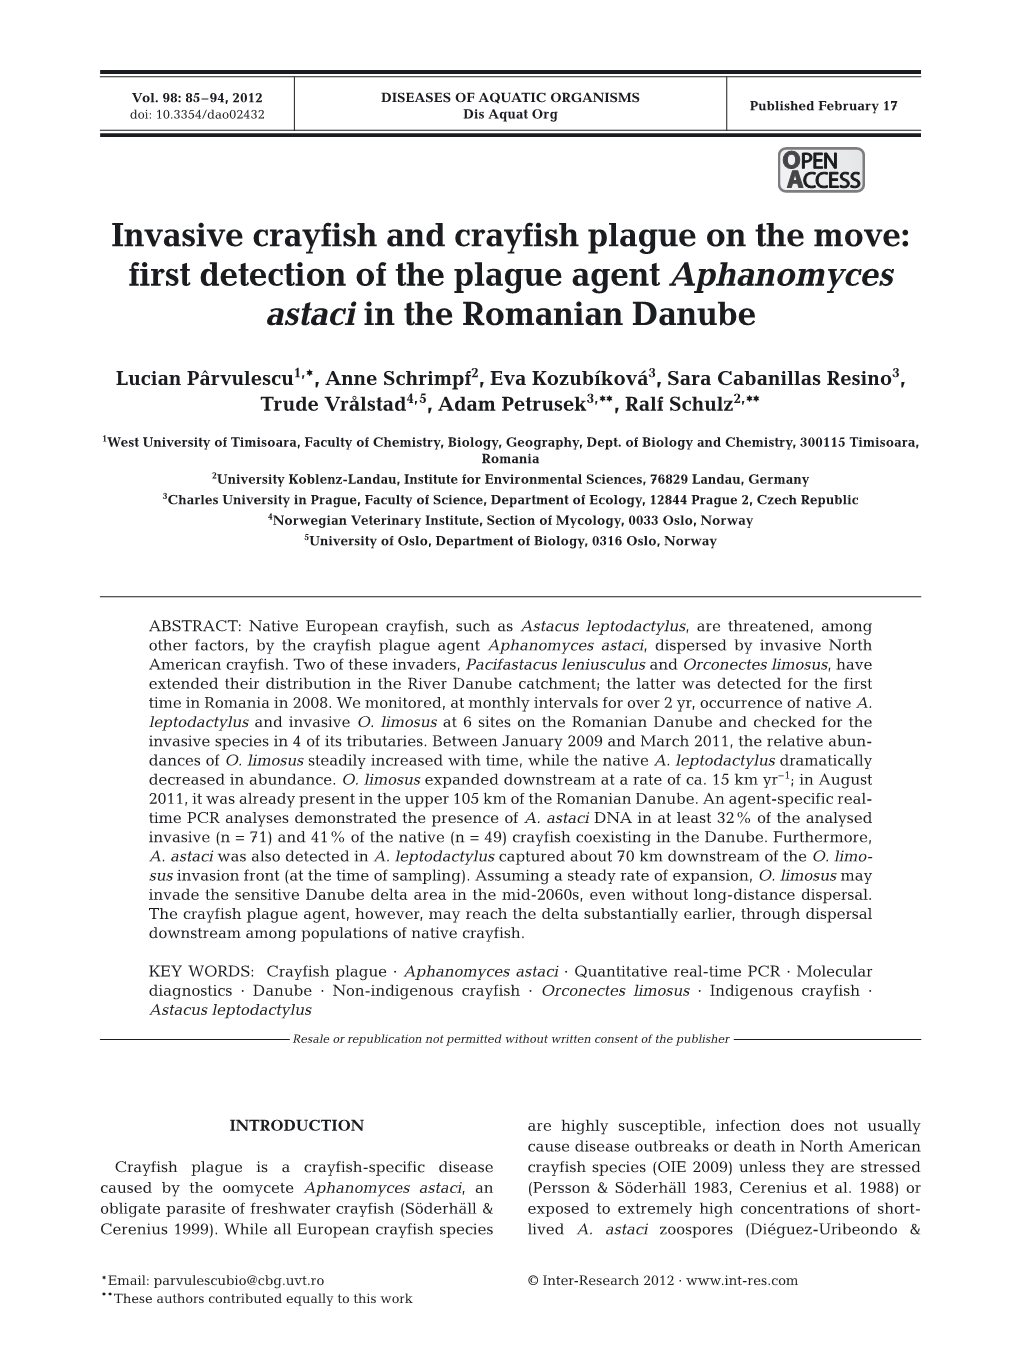 Invasive Crayfish and Crayfish Plague on the Move: First Detection of the Plague Agent Aphanomyces Astaci in the Romanian Danube